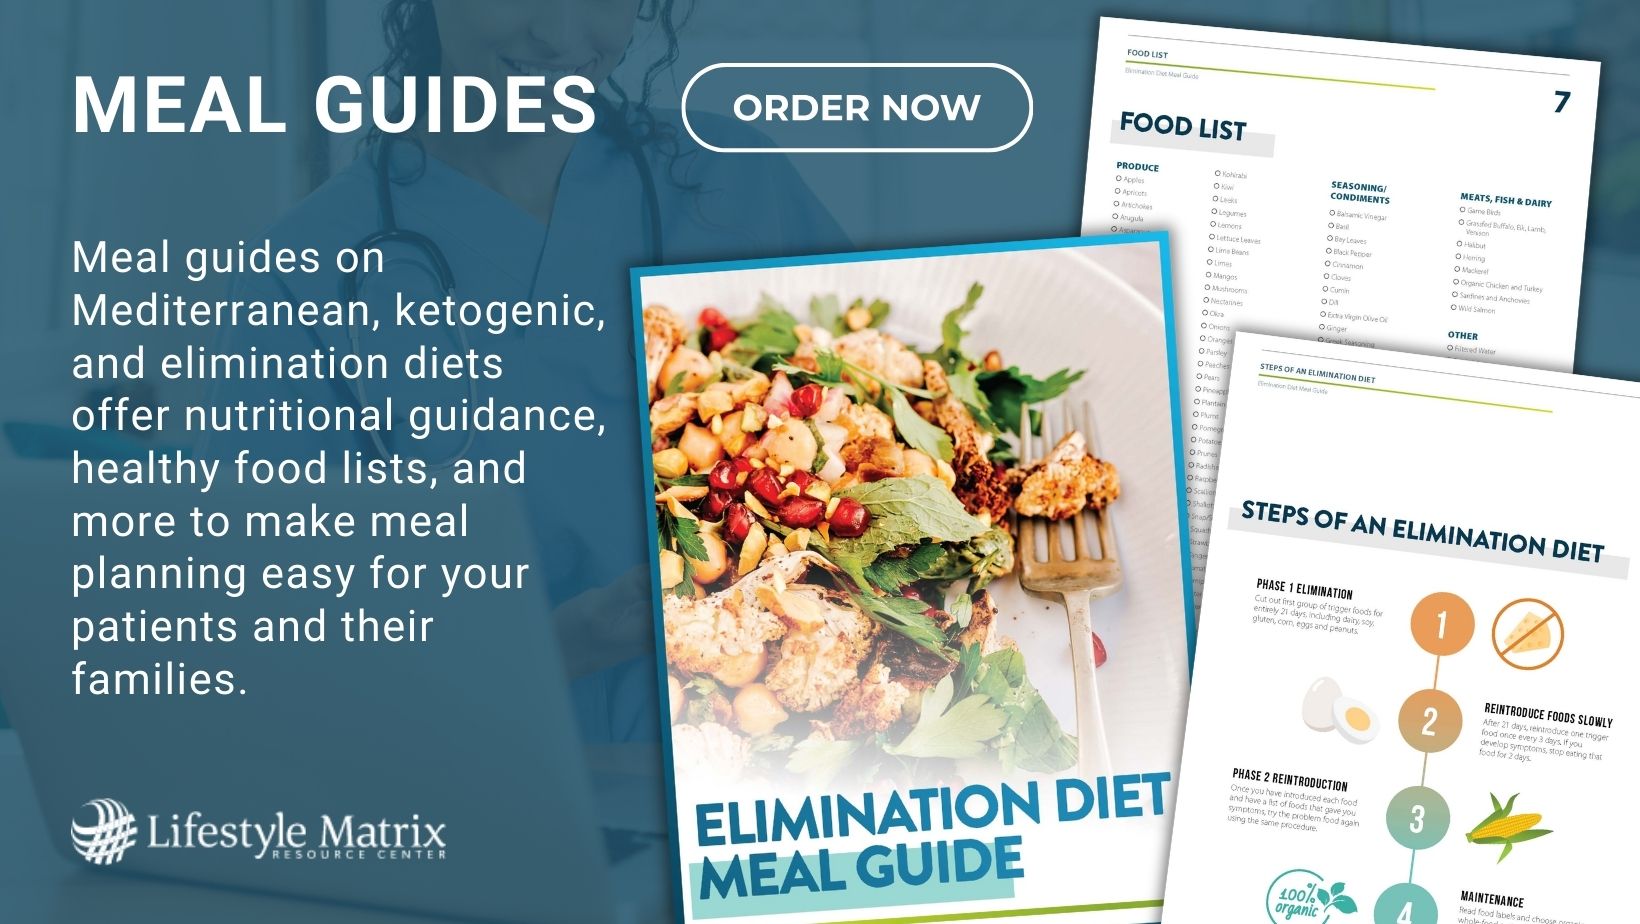 Meal Guides: Elimination, Ketogenic and Healthy & Balanced (Mediterranean) Diets